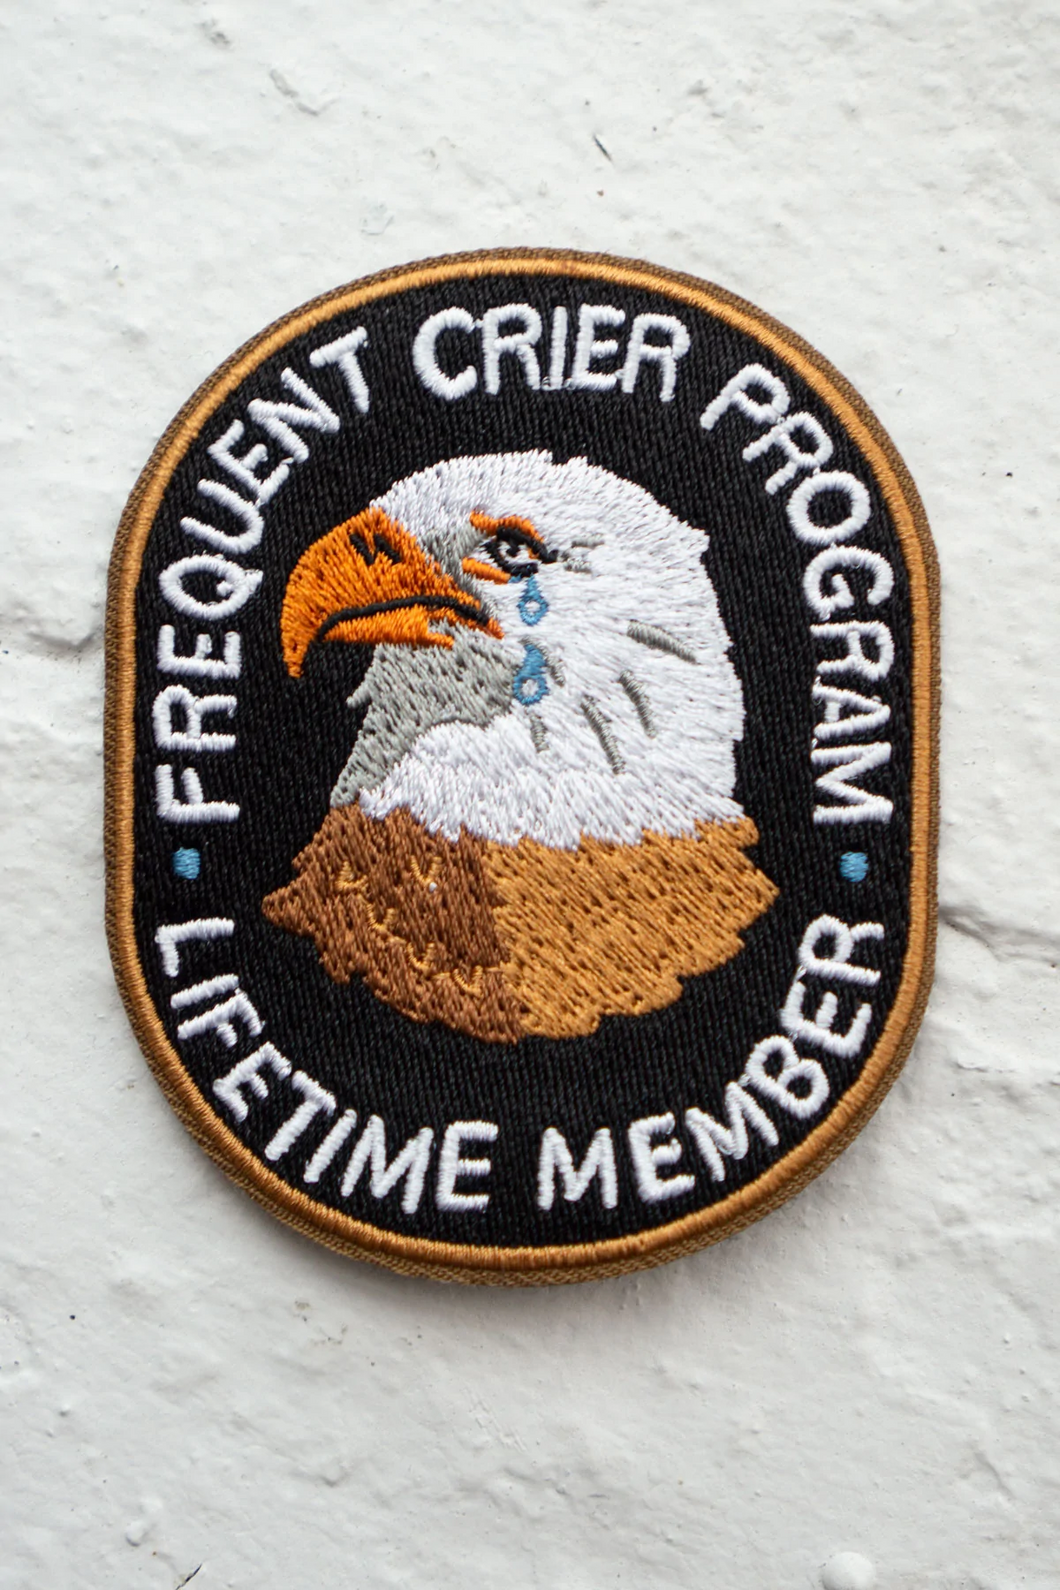 Frequent Crier Patch